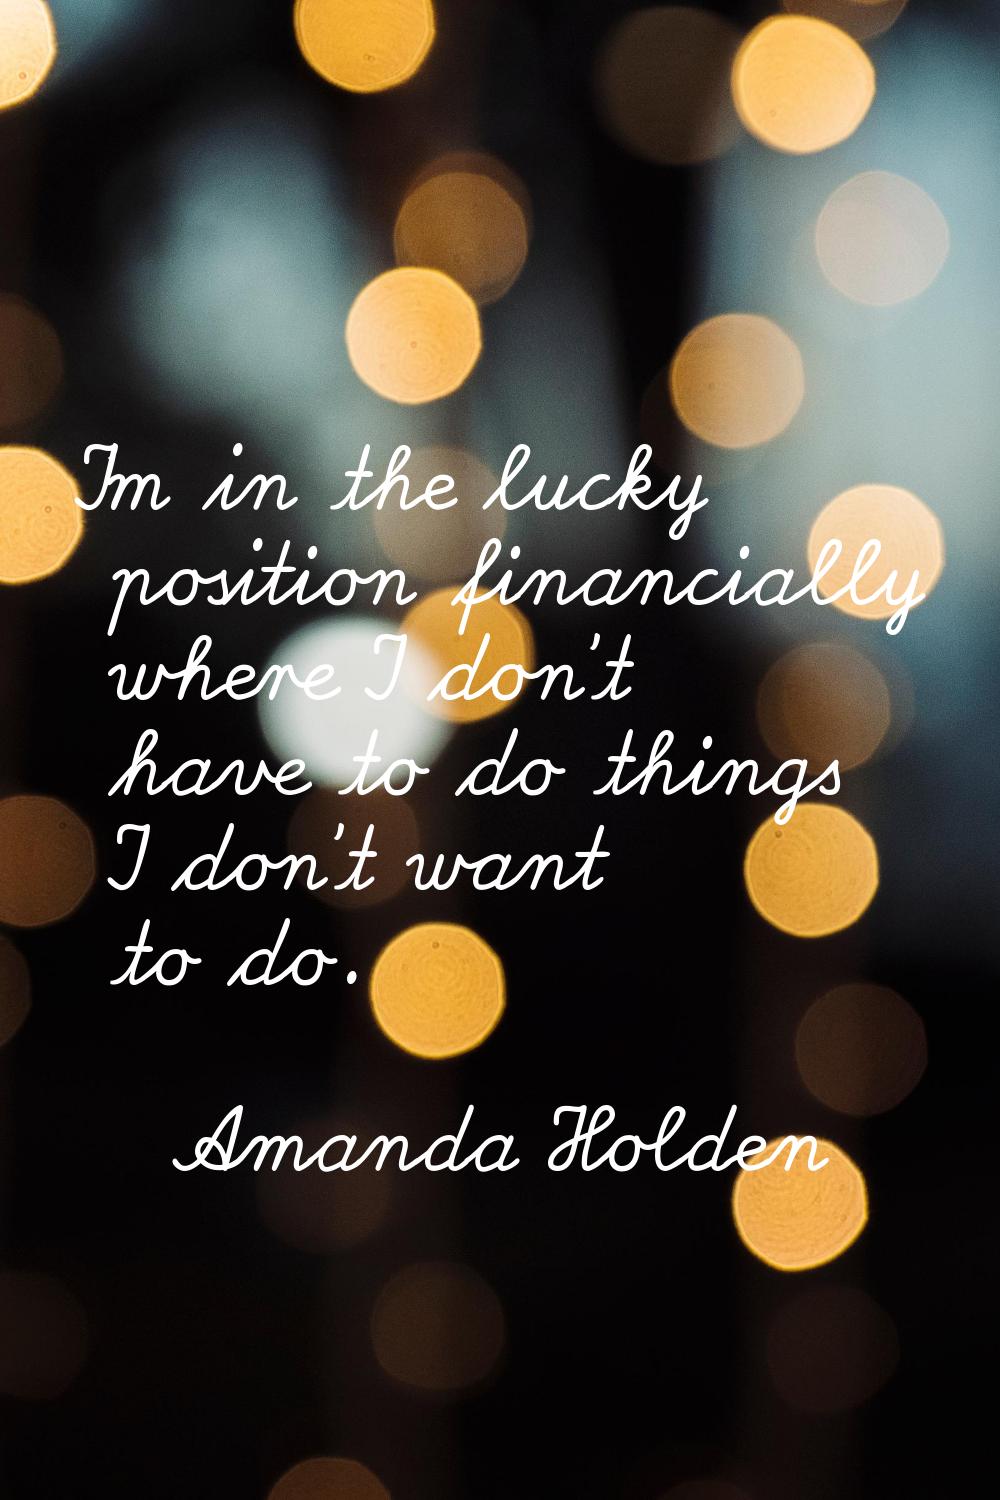 I'm in the lucky position financially where I don't have to do things I don't want to do.